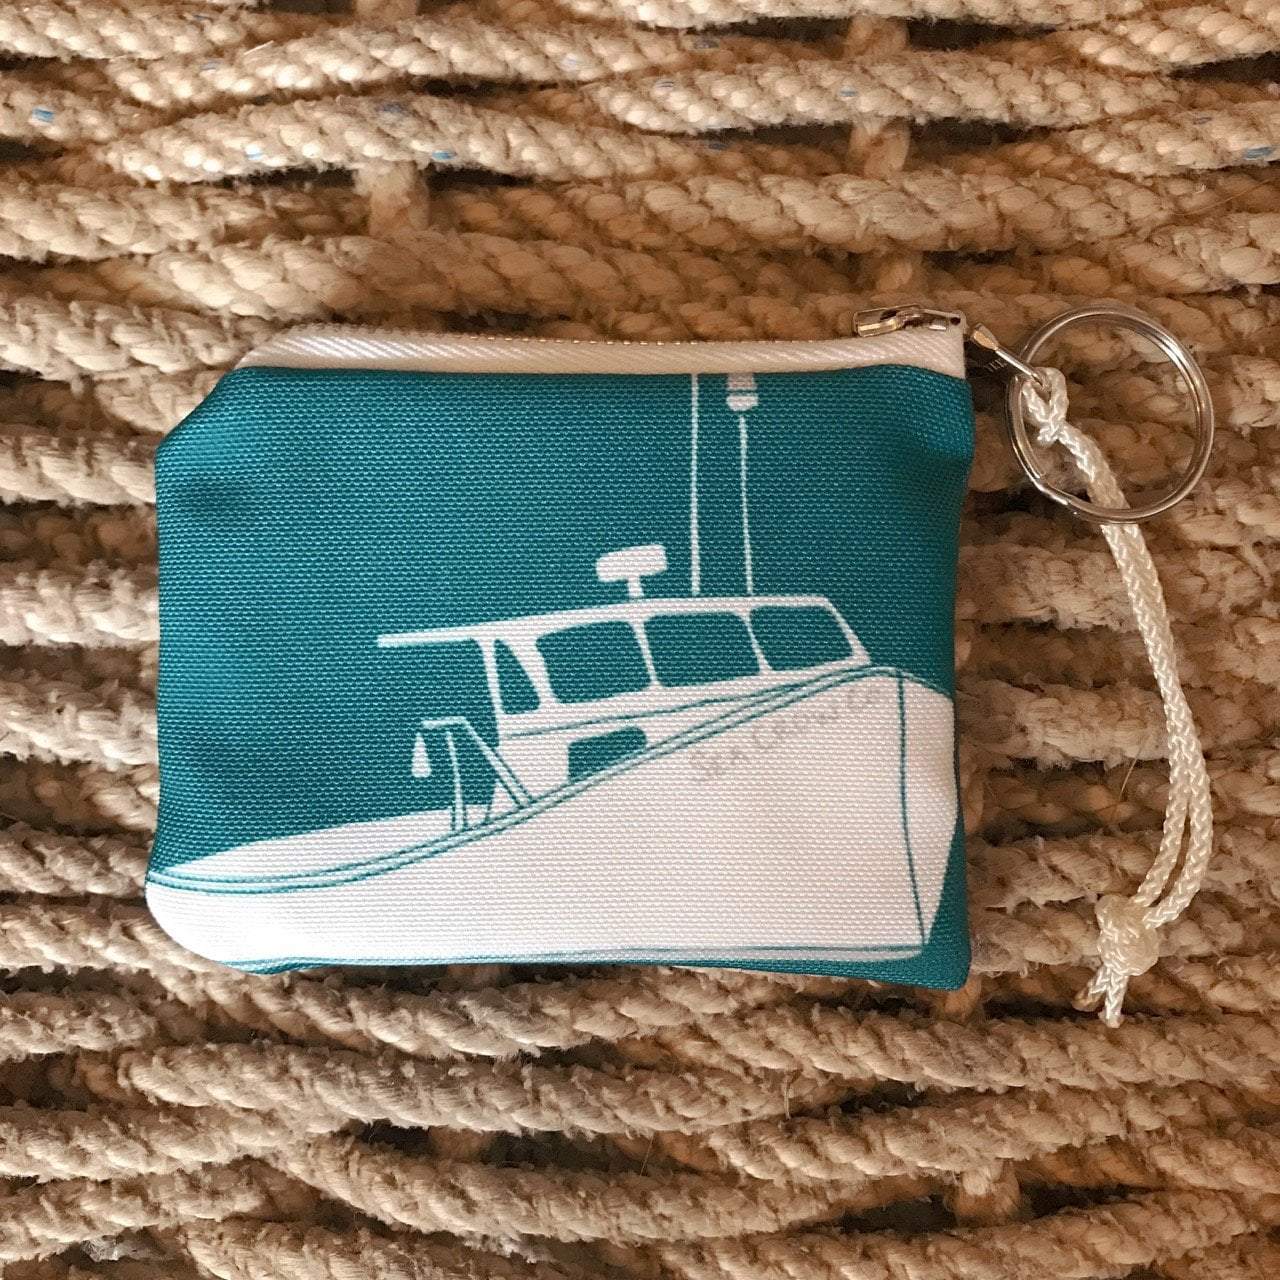 Sea Crow Co. Coin Purse in Teal Lobster Boat Beachdashery® Jewelry